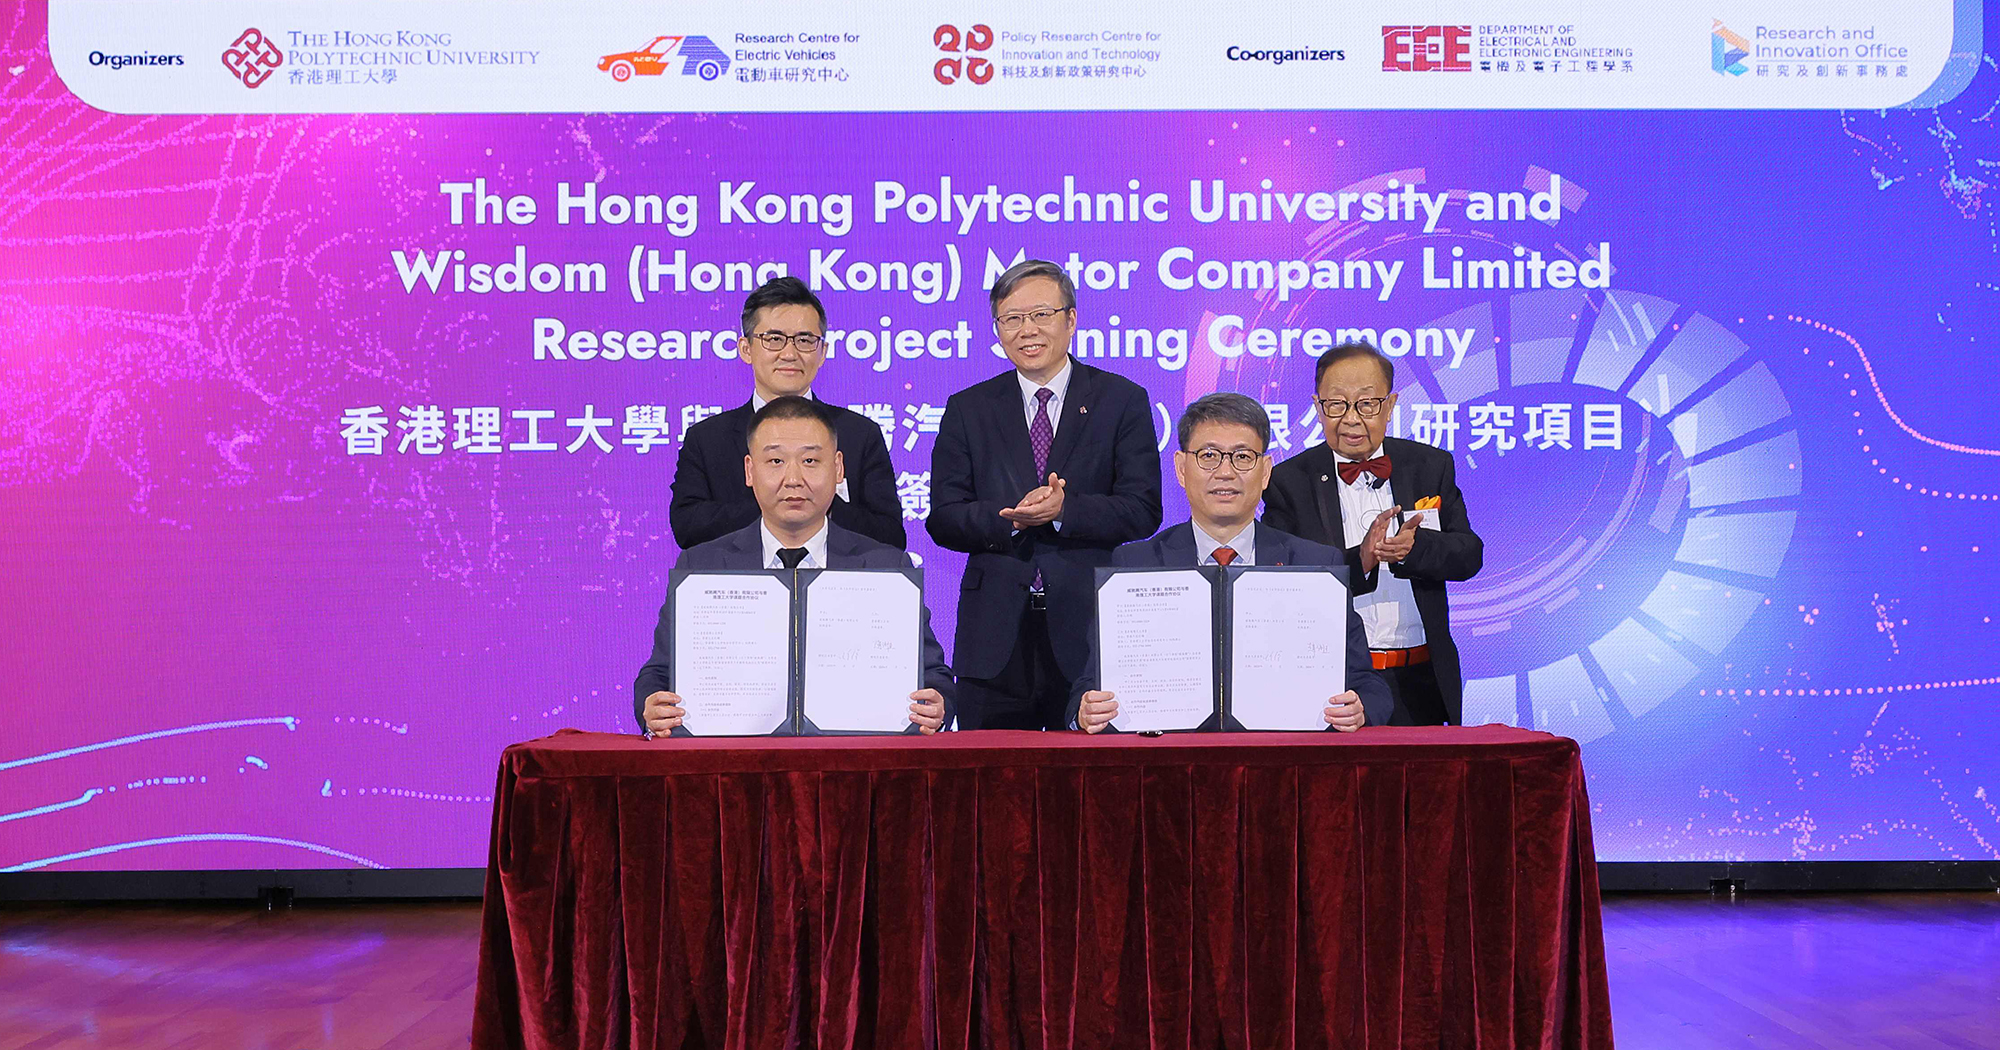 Witnessed by Prof. Jin-Guang Teng, PolyU President (centre, back row); Prof. C.C. Chan, RCEV Director (right, back row), Dr Yufeng WAN, Director of Wisdom Motor and Partner at Templewater (left, back row), an MoU was signed by Prof. Christopher Chao, PolyU Vice President (Research and Innovation), and Director of the Policy Research Centre for Innovation and Technology (right, front row); and Mr Felix XU, Chief Strategy Officer and Global Treasurer, Wisdom Motor (left, front row).